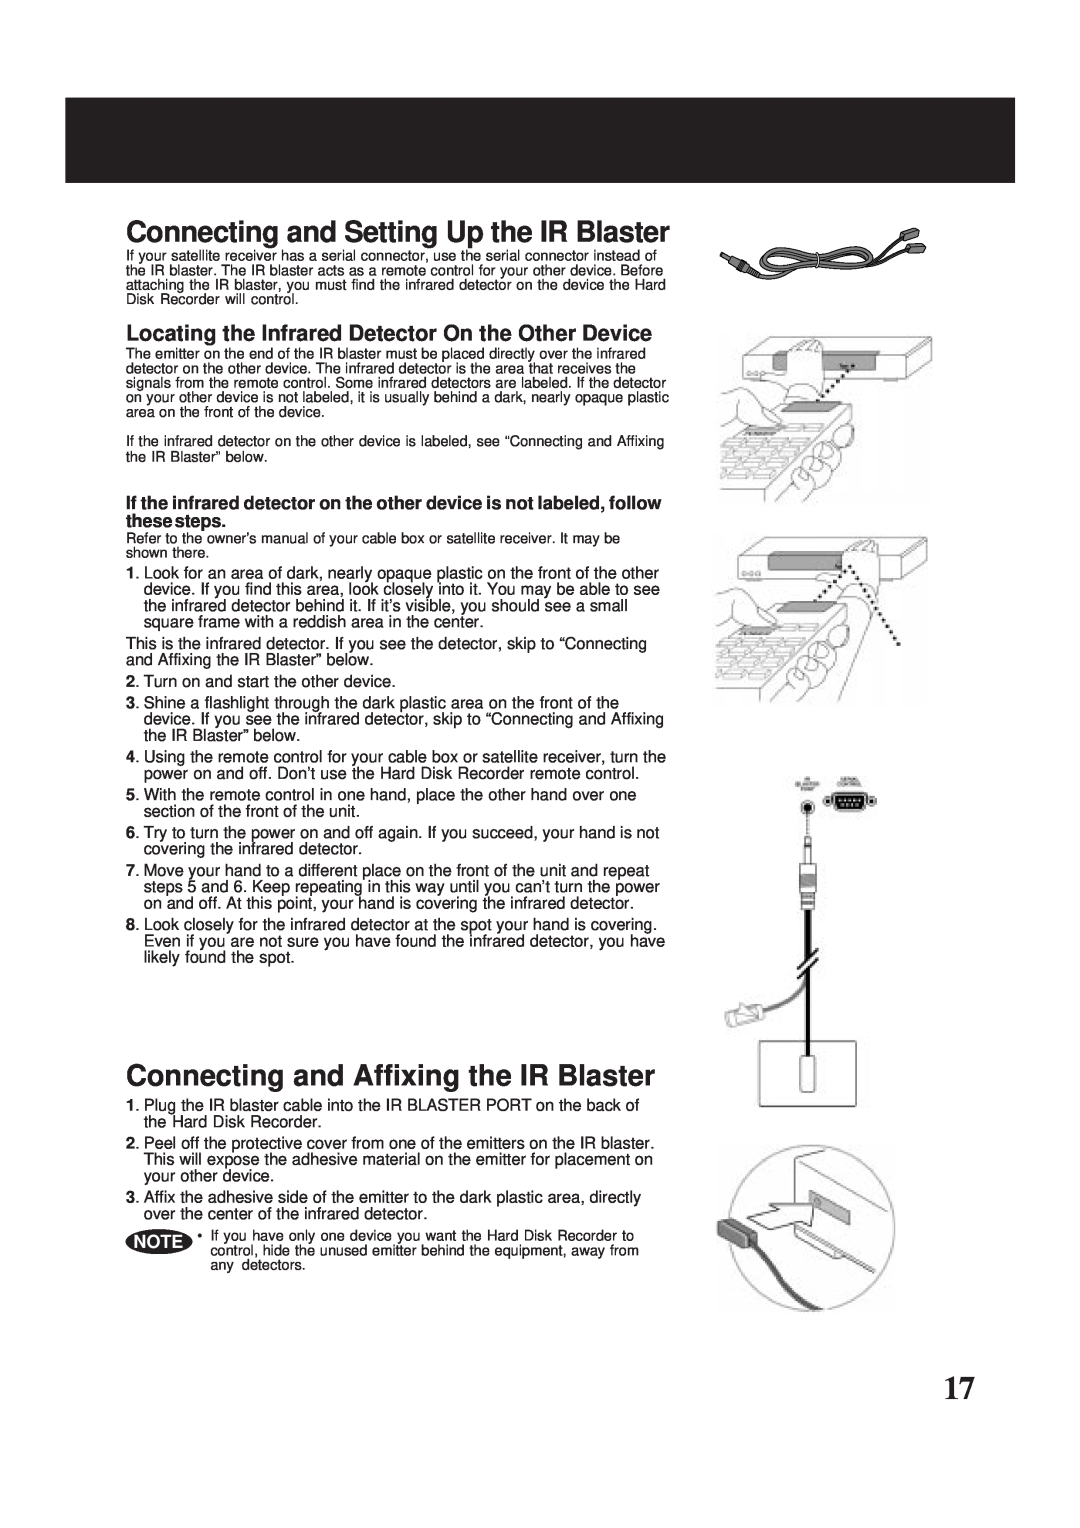 Panasonic PV-HS2000 operating instructions Connecting and Setting Up the IR Blaster, Connecting and Affixing the IR Blaster 